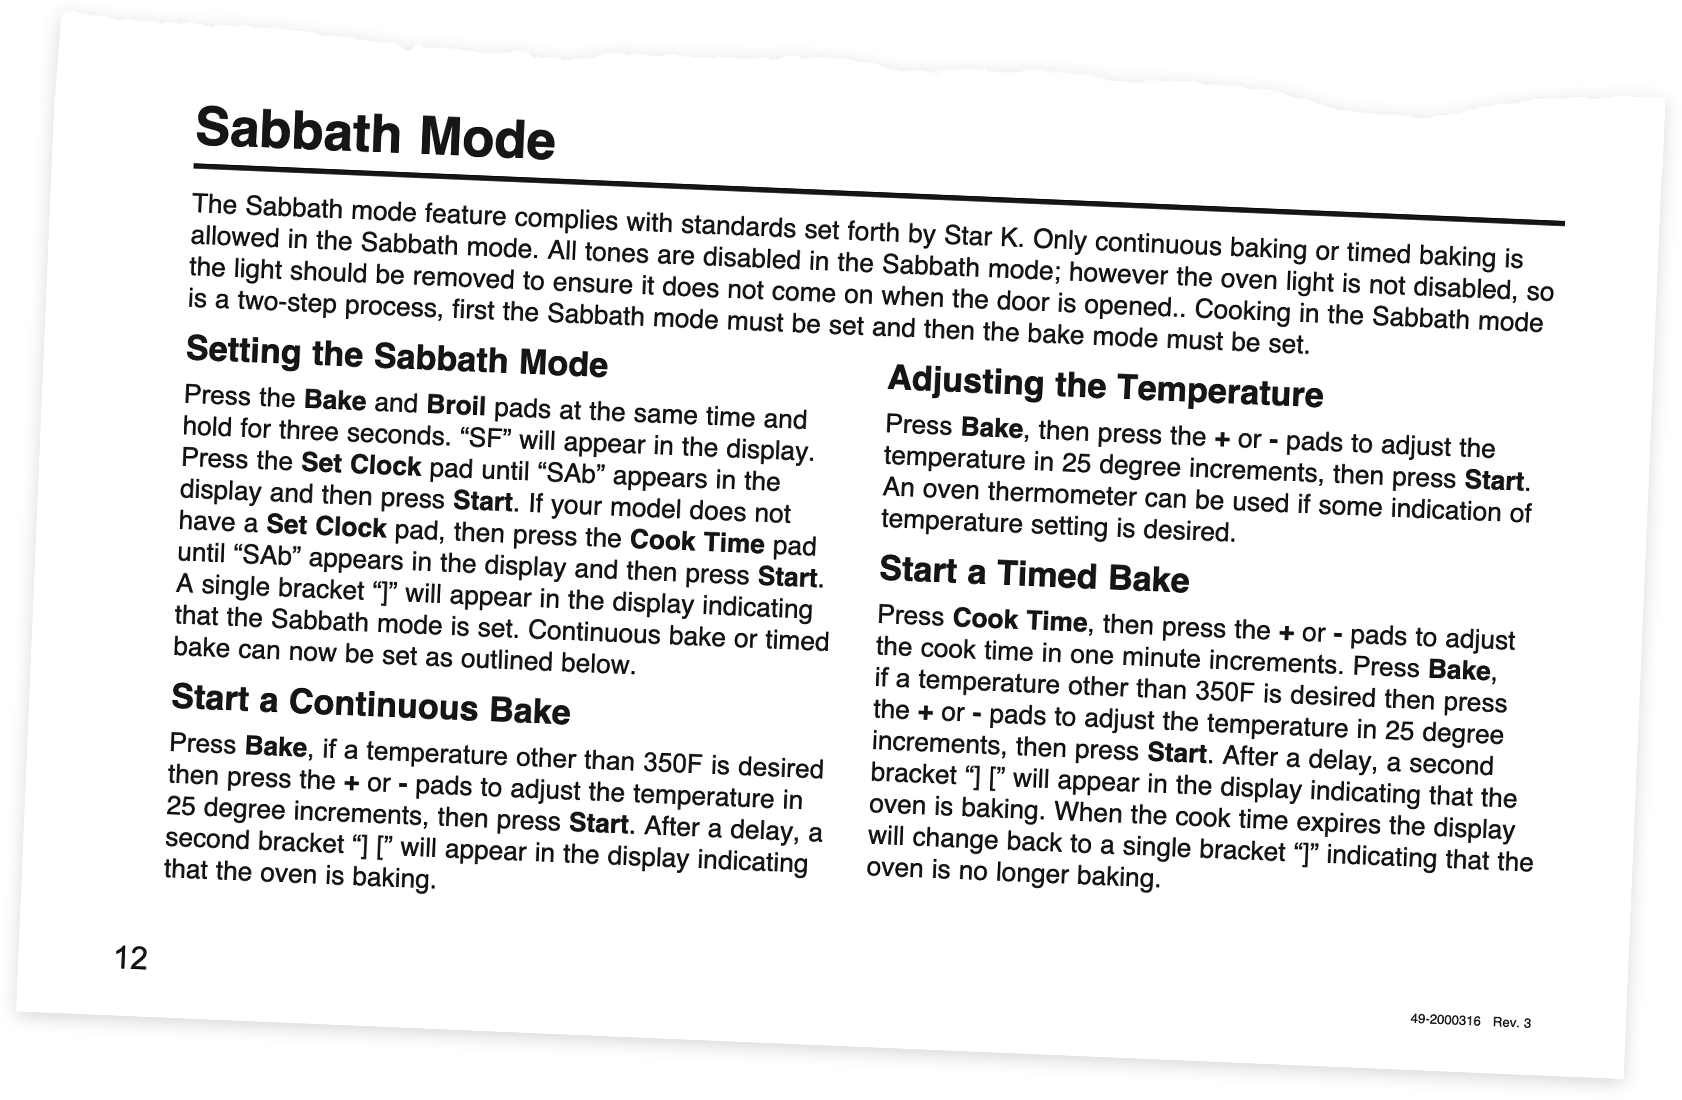 The torn lower half of page twelve from an instruction manual for an oven. The heading reads, 'Sabbath Mode.' The instructions read, 'The Sabbath mode feature complies with standards set forth by Star K. Only continious baking or timed baking is allowed in Sabbath mode. All tones are disabled in the Sabbath mode; however the oven light is not disabled, so the light should be removed to ensure it does not come on when the door is opened. Cooking in the Sabbth mode is a two-step process, first the Sabbth mode must be set and then the bake mode must be set.' Following that are instructions for setting Sabbth Mode, starting a continious bake, adjusting the temperature, and starting a timed bake.